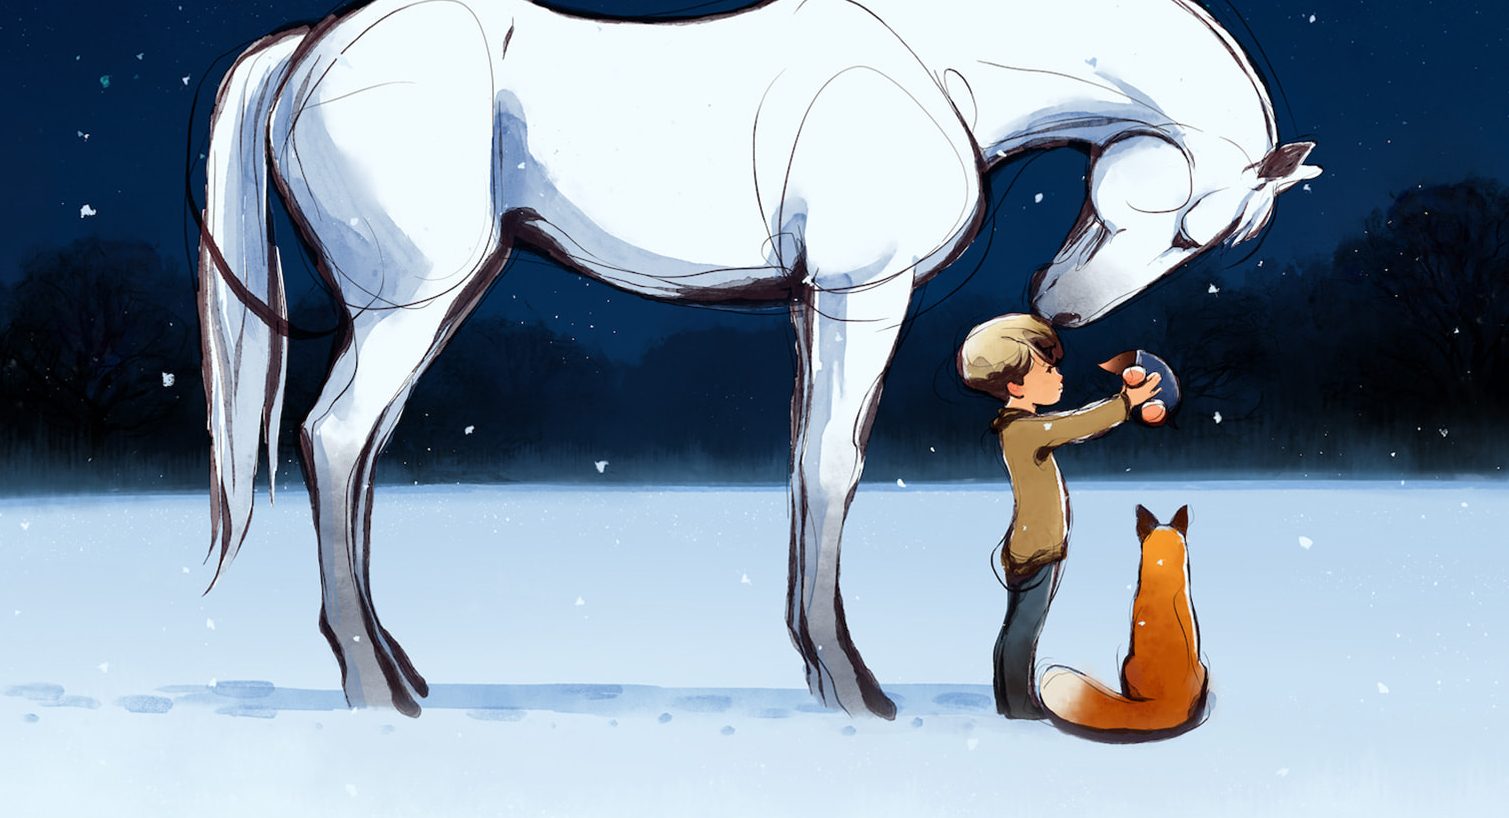 horse, boy and fox stand on snowy ground